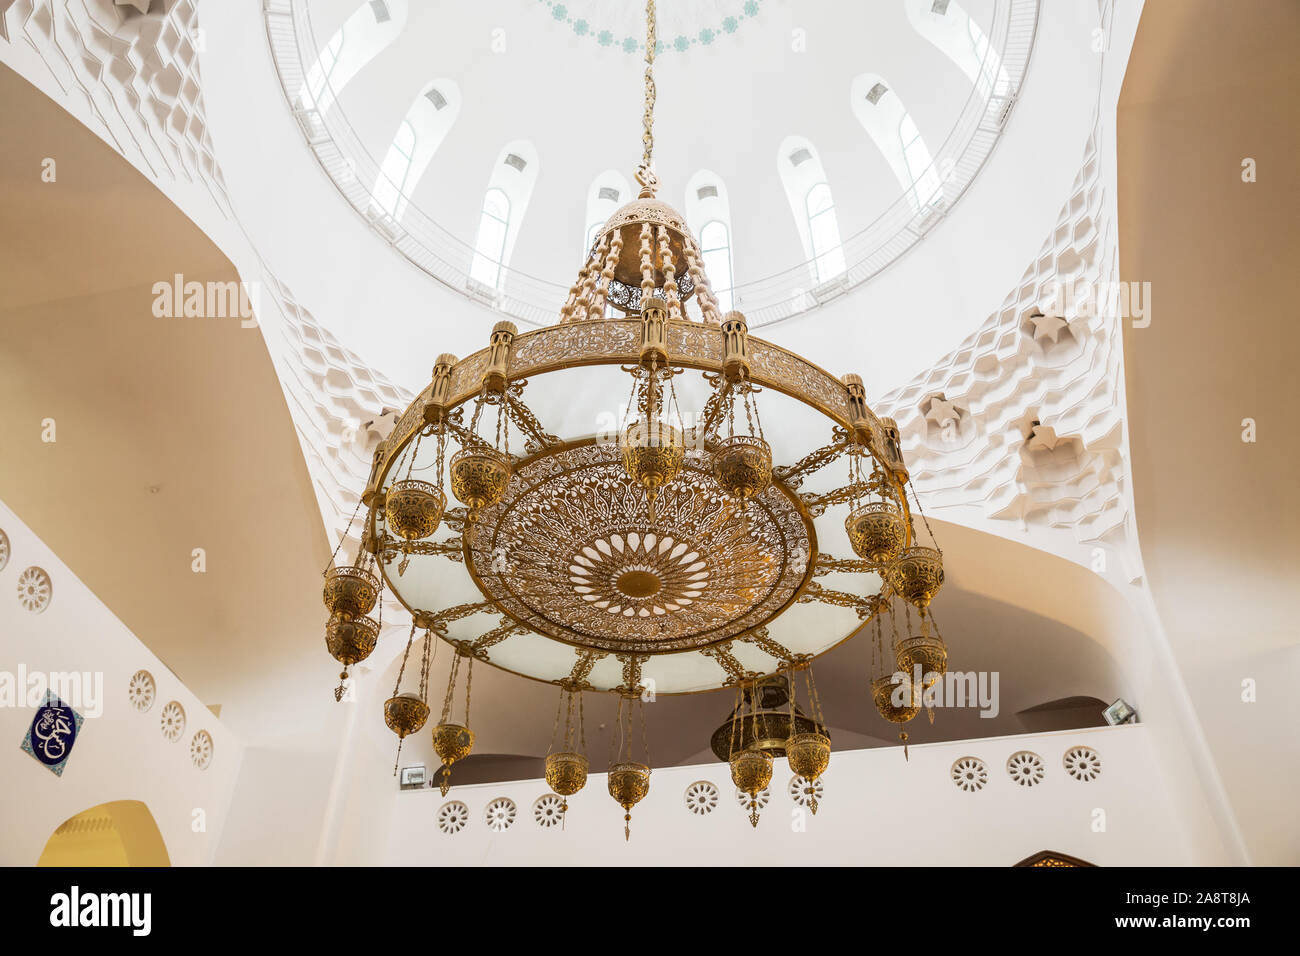 ST. PETERSBURG, RUSSIA - OCTOBER 26, 2019: beautiful chandelier made of glass and metal in interior of the cathedral mosque in Saint Petersburg Stock Photo